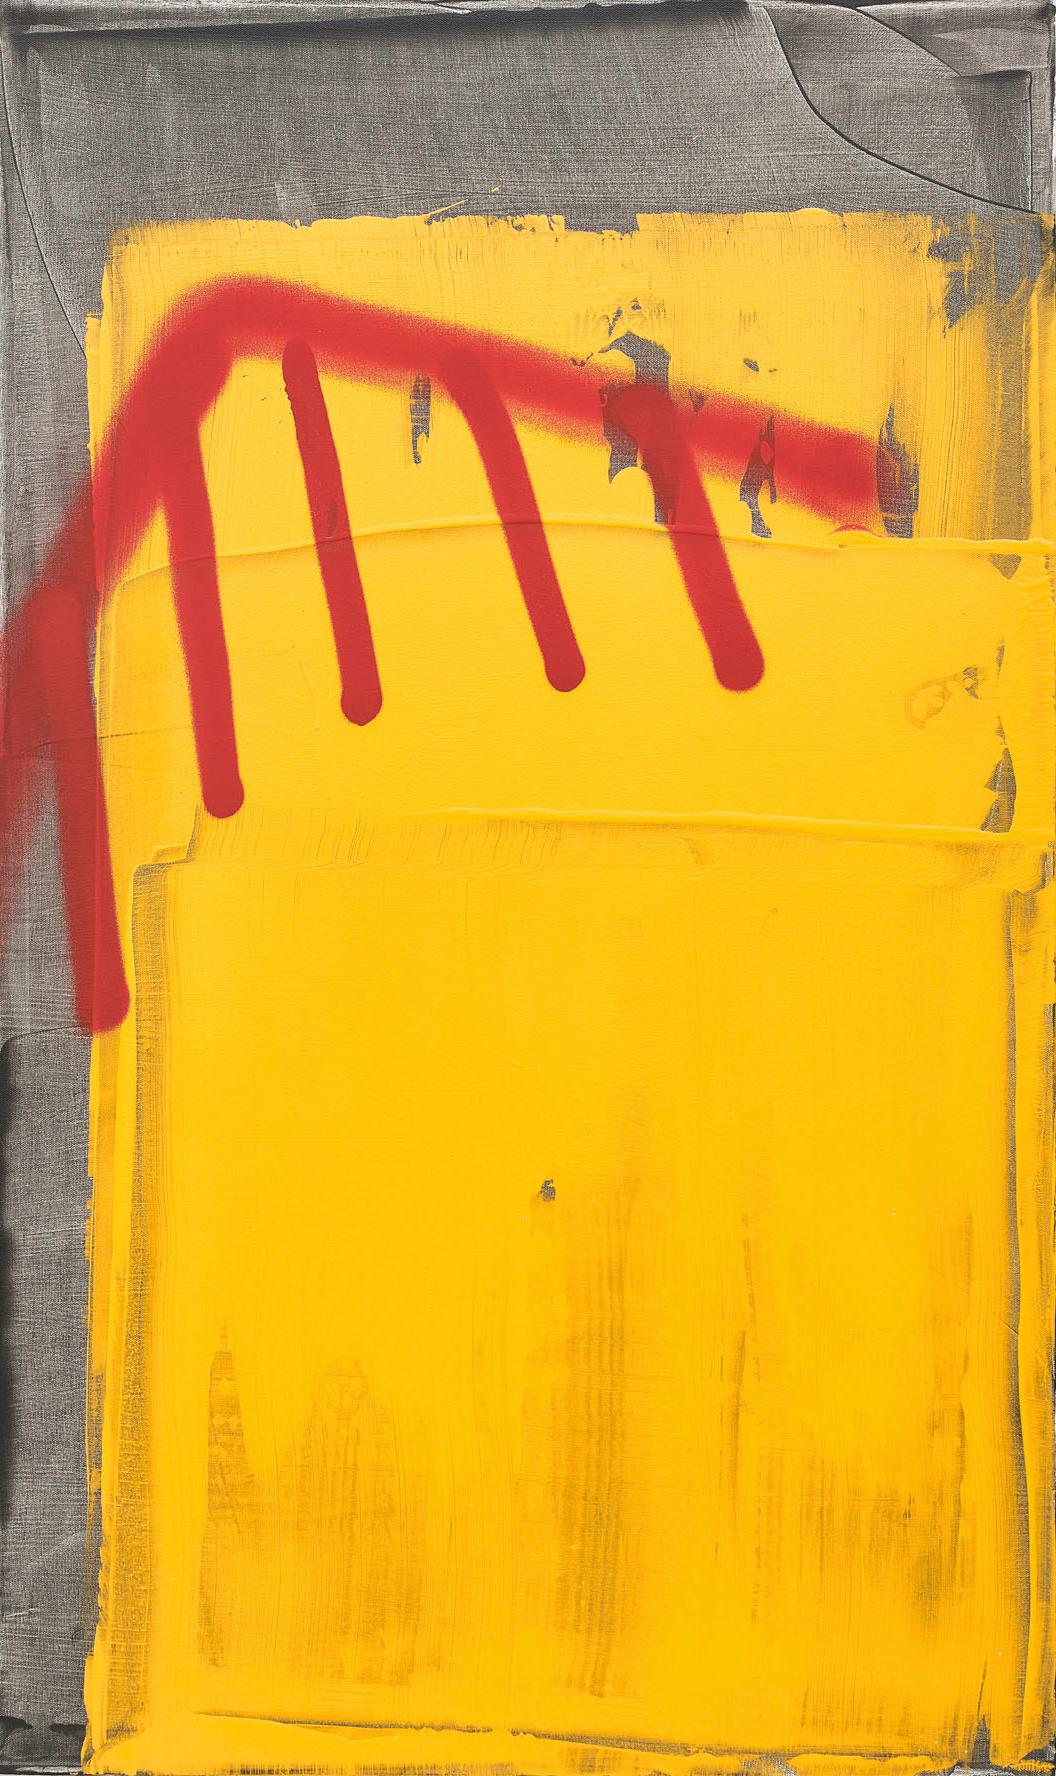 Mel Reese Figurative Painting - "Domestic Violence", contemporary yellow & red abstract acrylic & spray paint